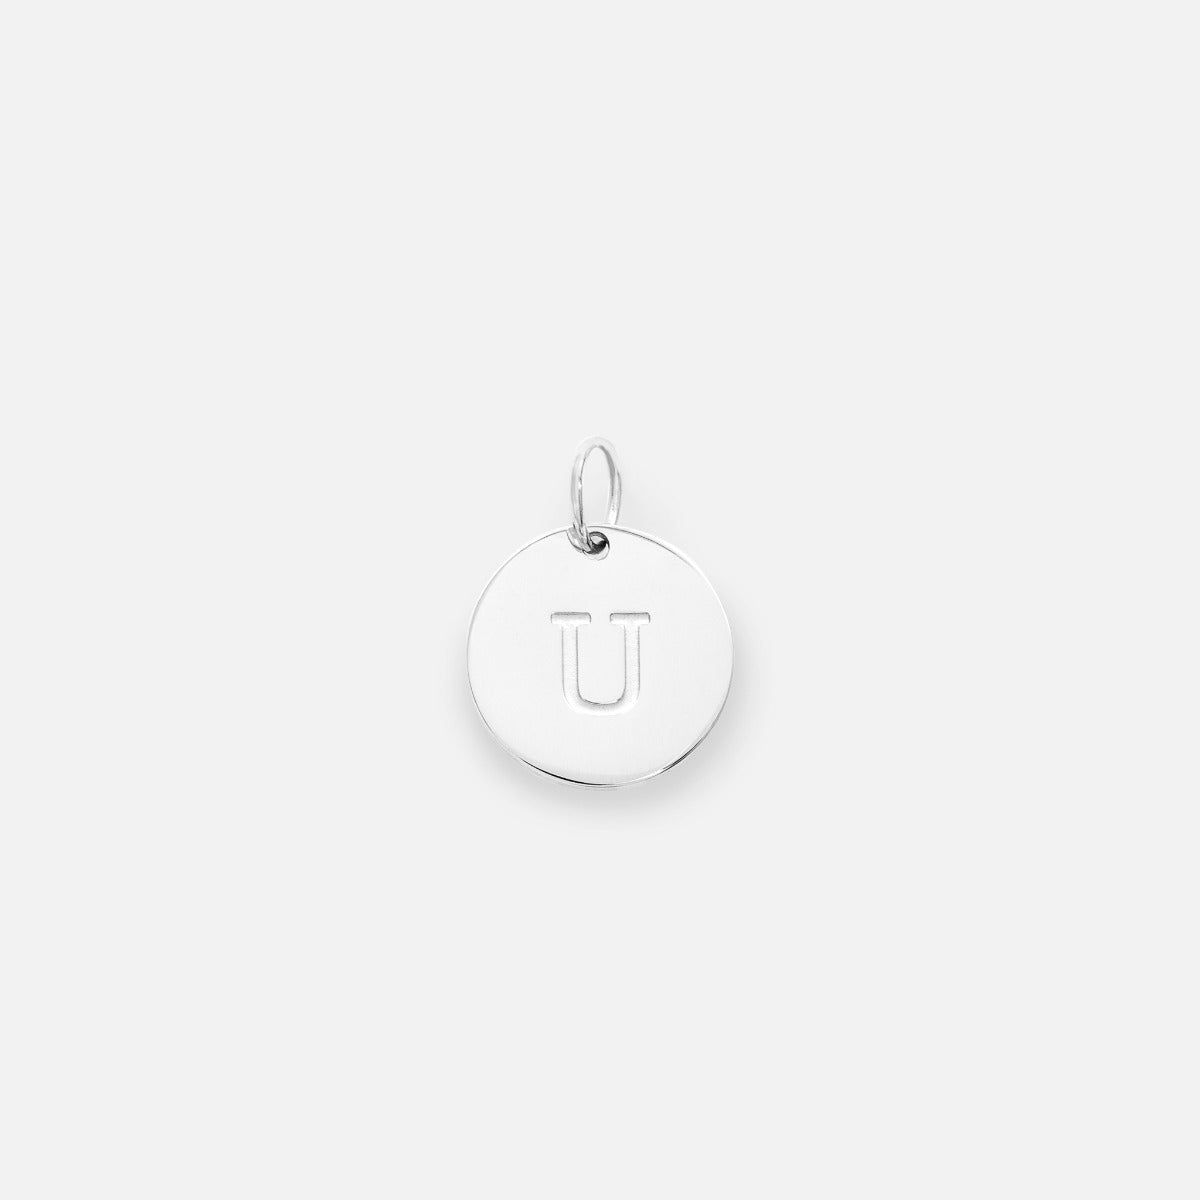 Small symbolic silvered charm engraved with the letter of the alphabet "u"